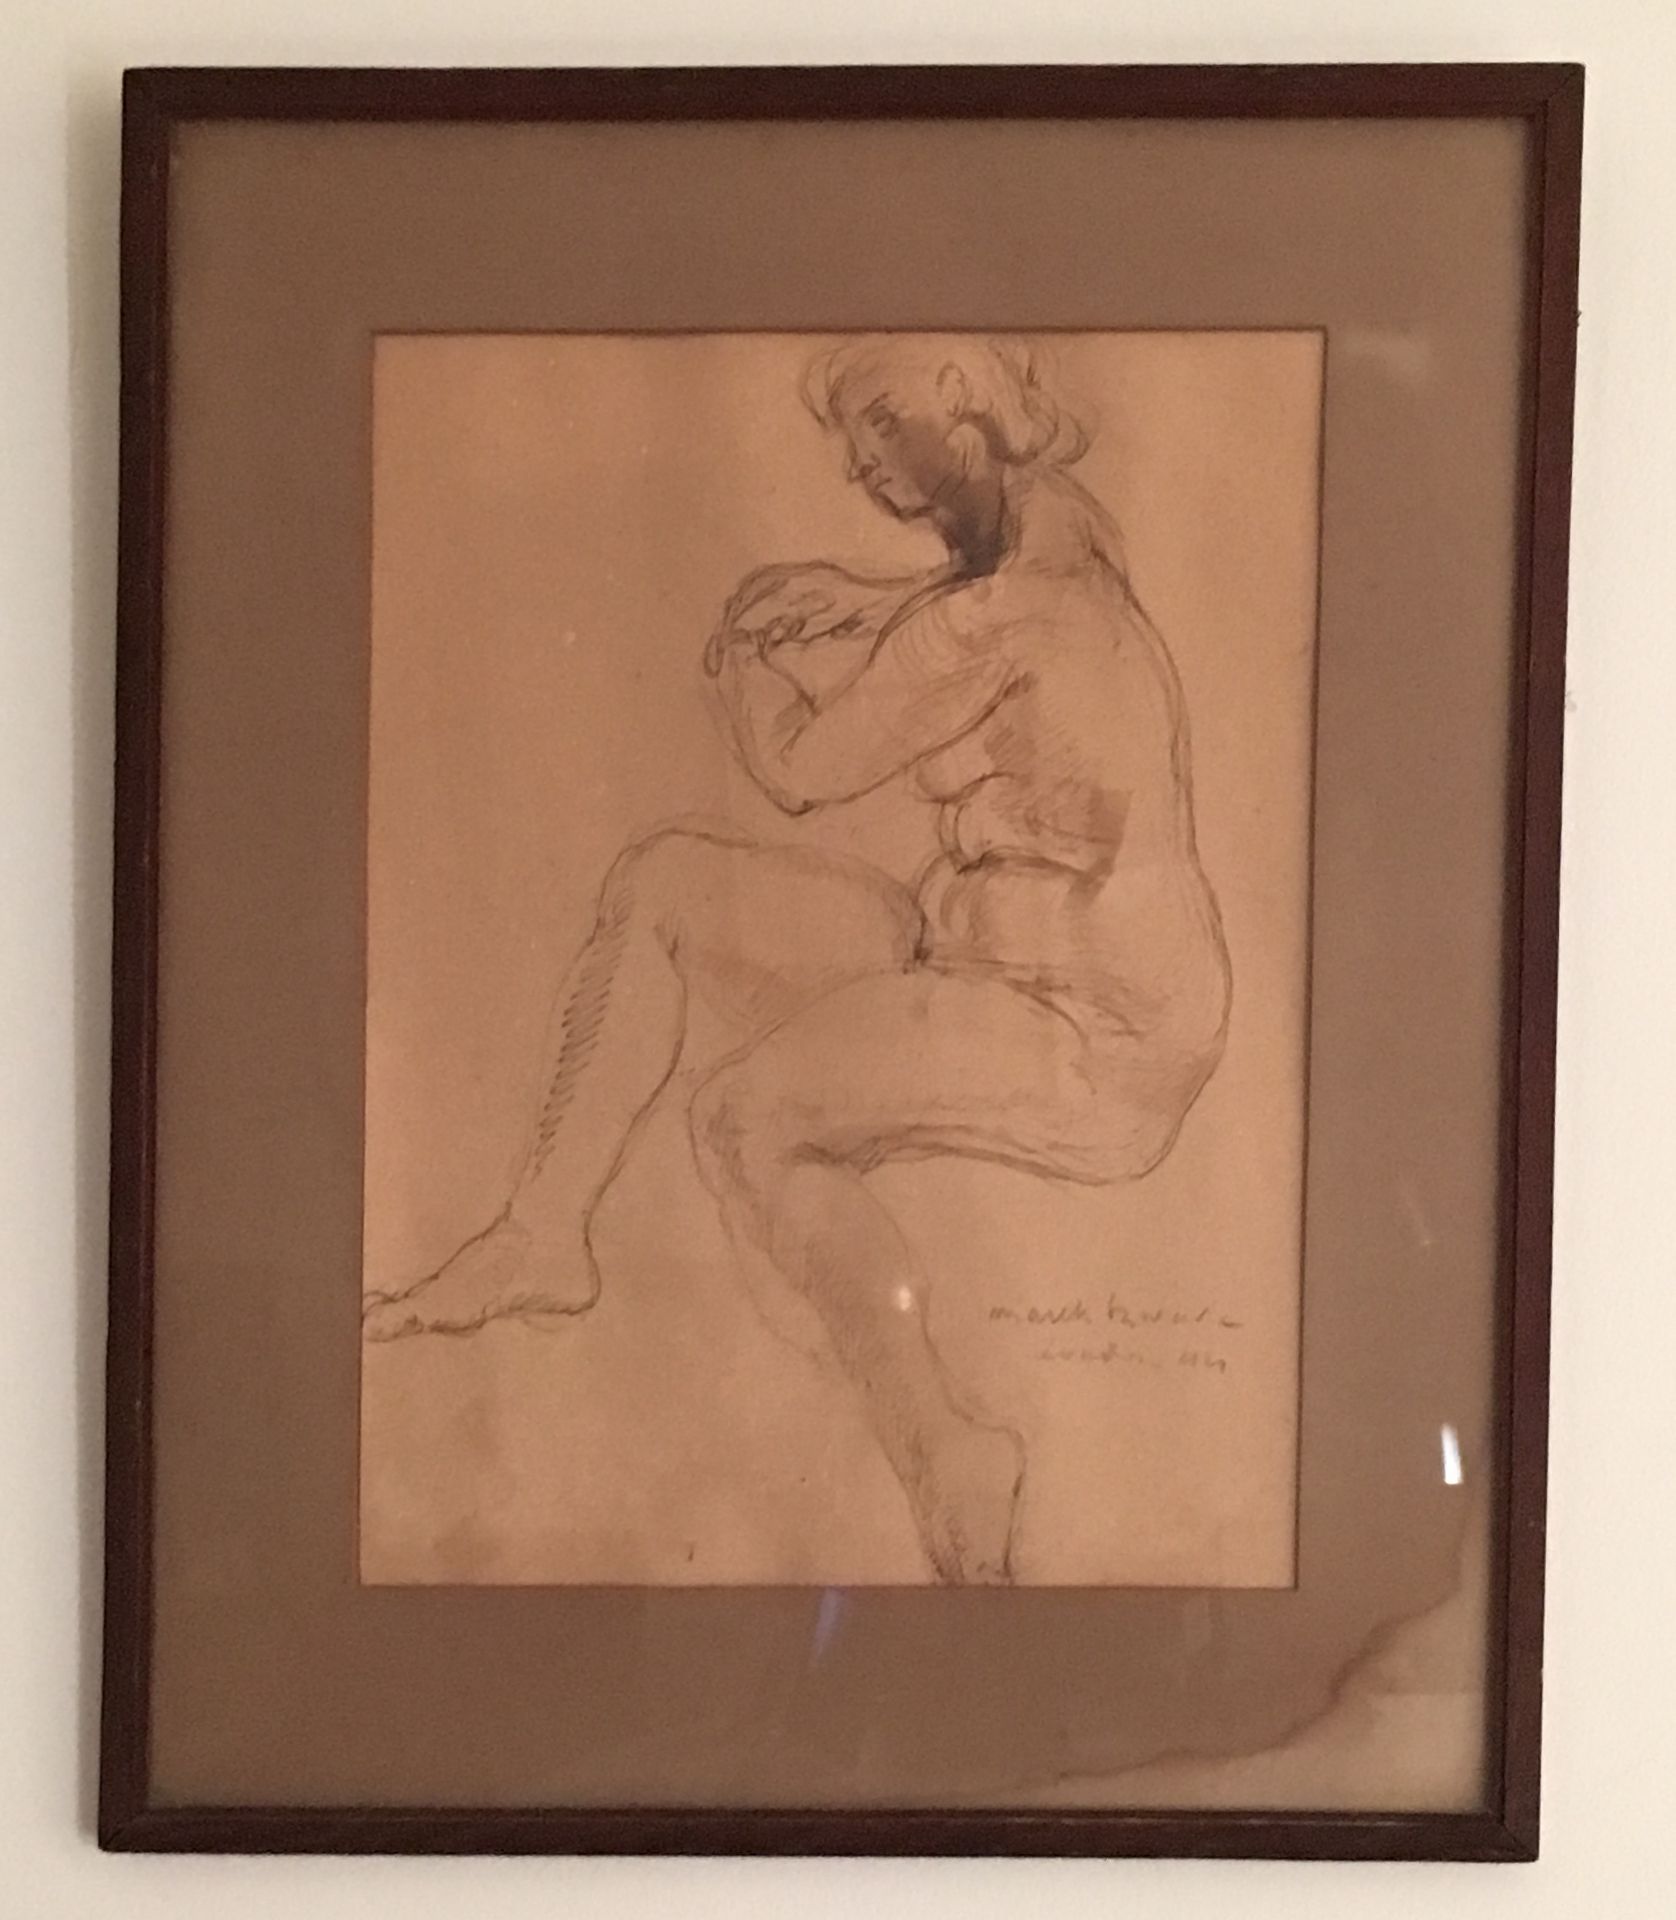 Seated female nude, 1944, Signed by Marek Szwarc